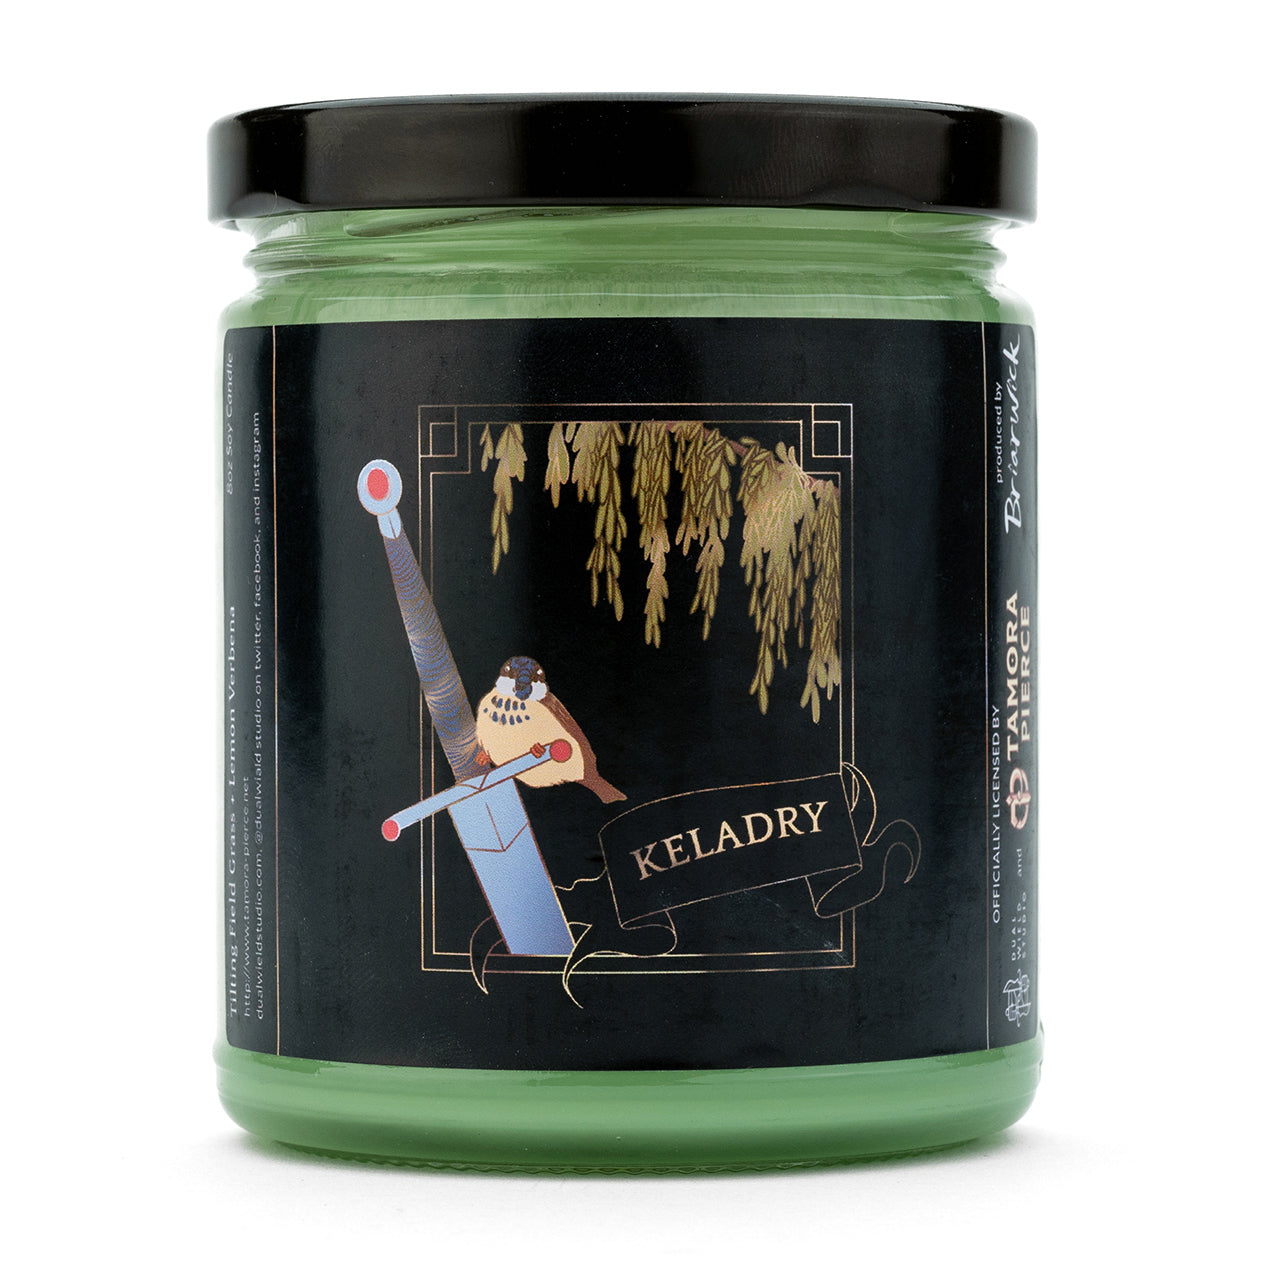 Keladry Candle - Tamora Pierce Officially Licensed - Soy Vegan Candle